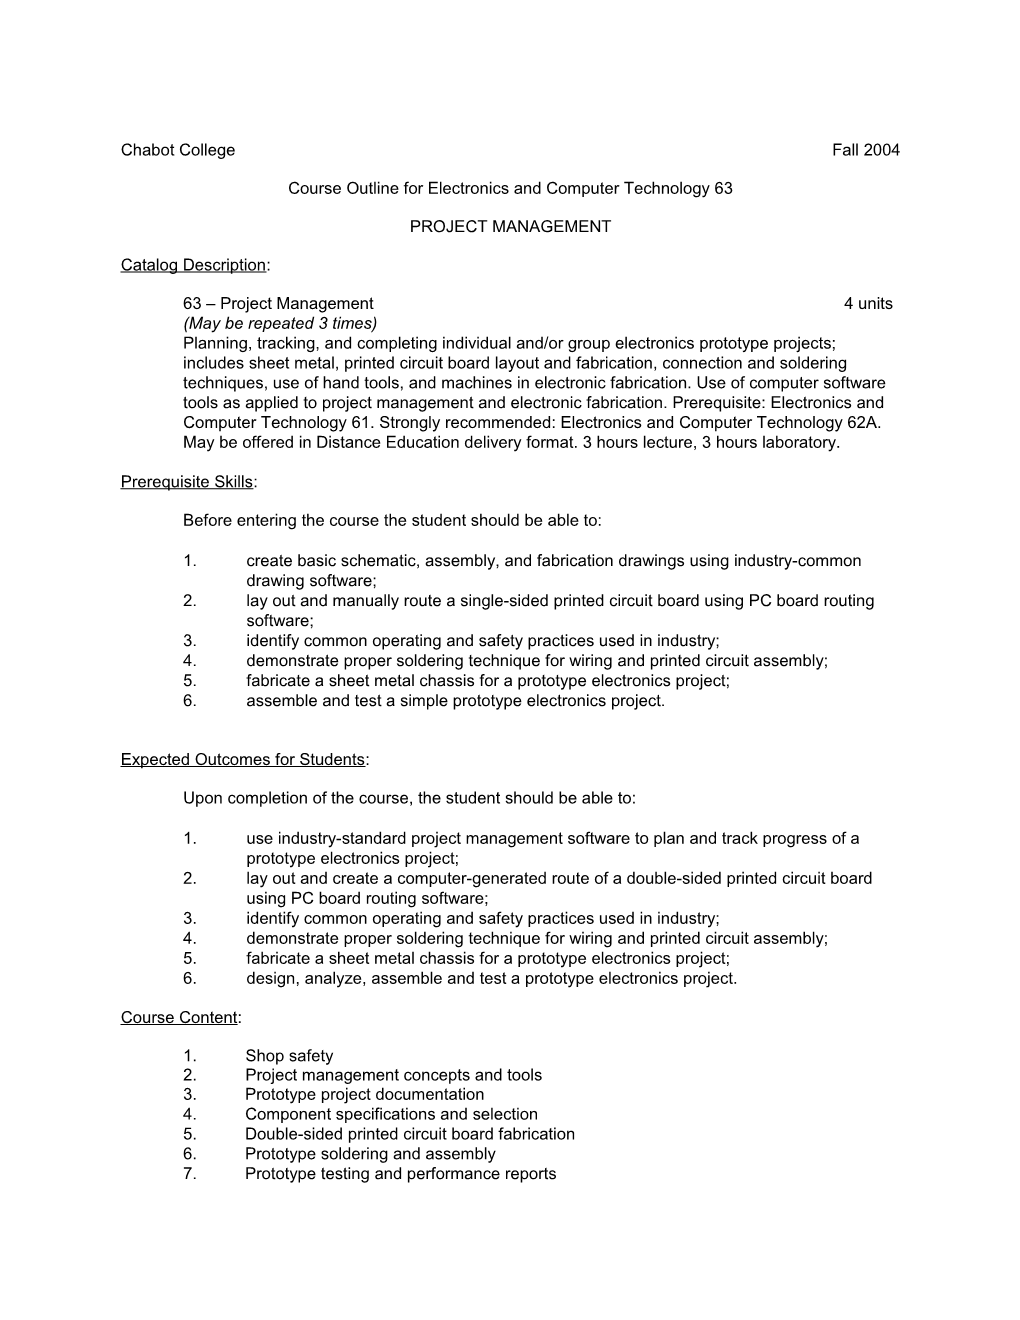 Course Outline for Electronics and Computer Technology 63